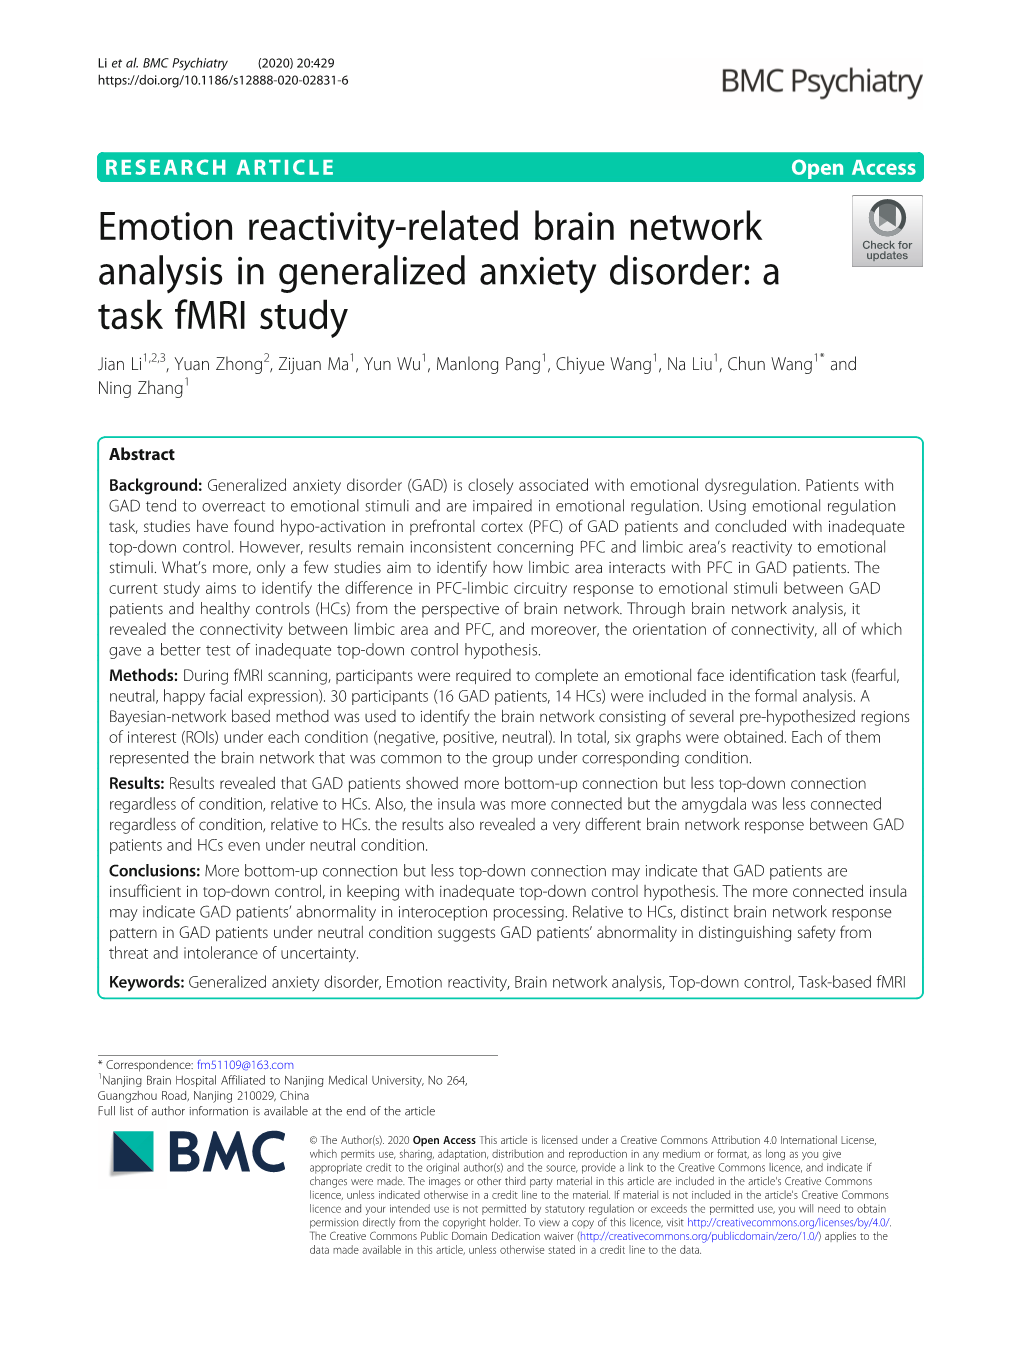 Emotion Reactivity-Related Brain Network Analysis in Generalized